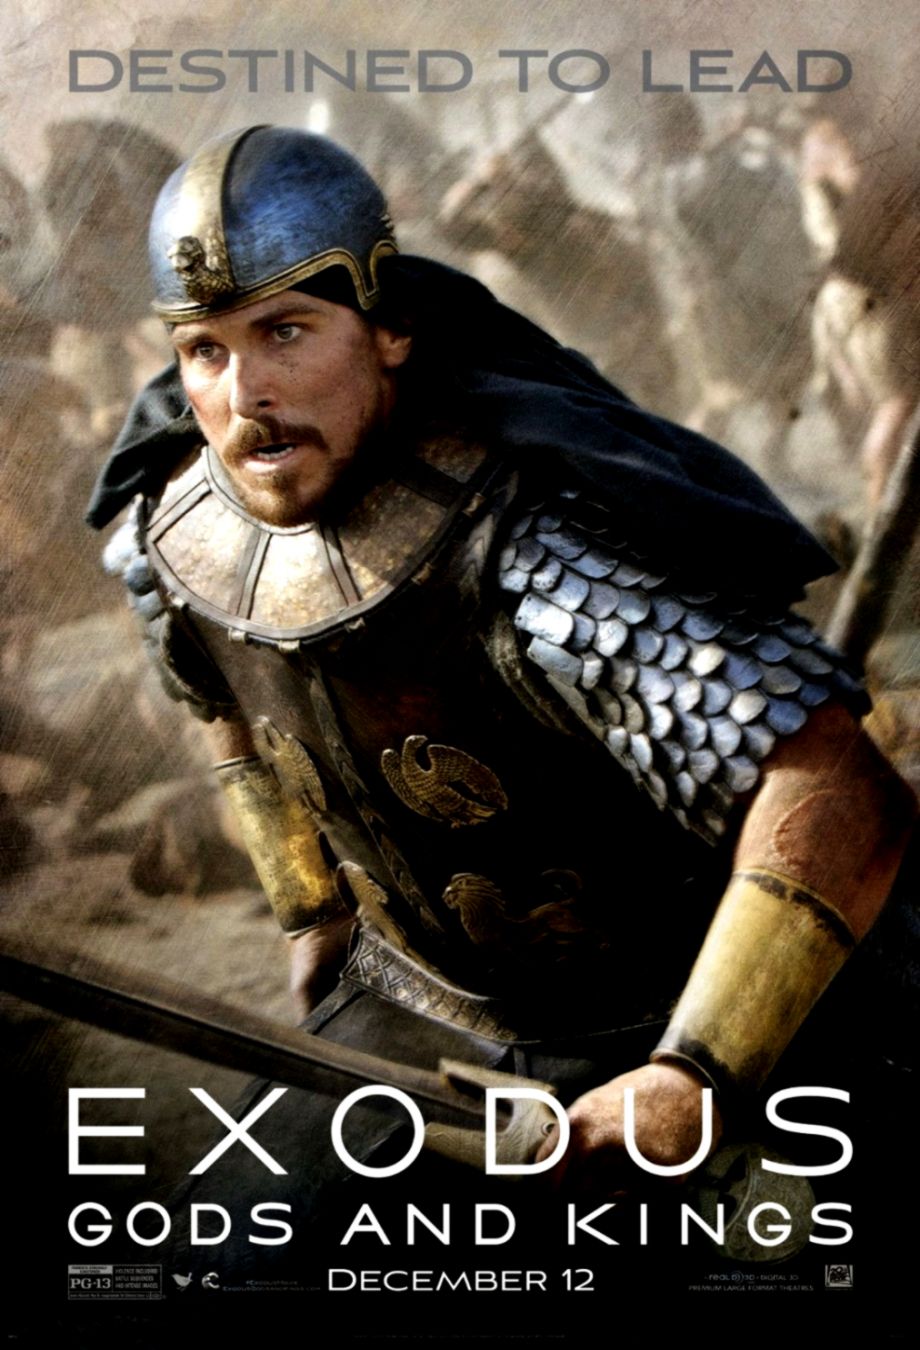 exodus gods and kings download mp4